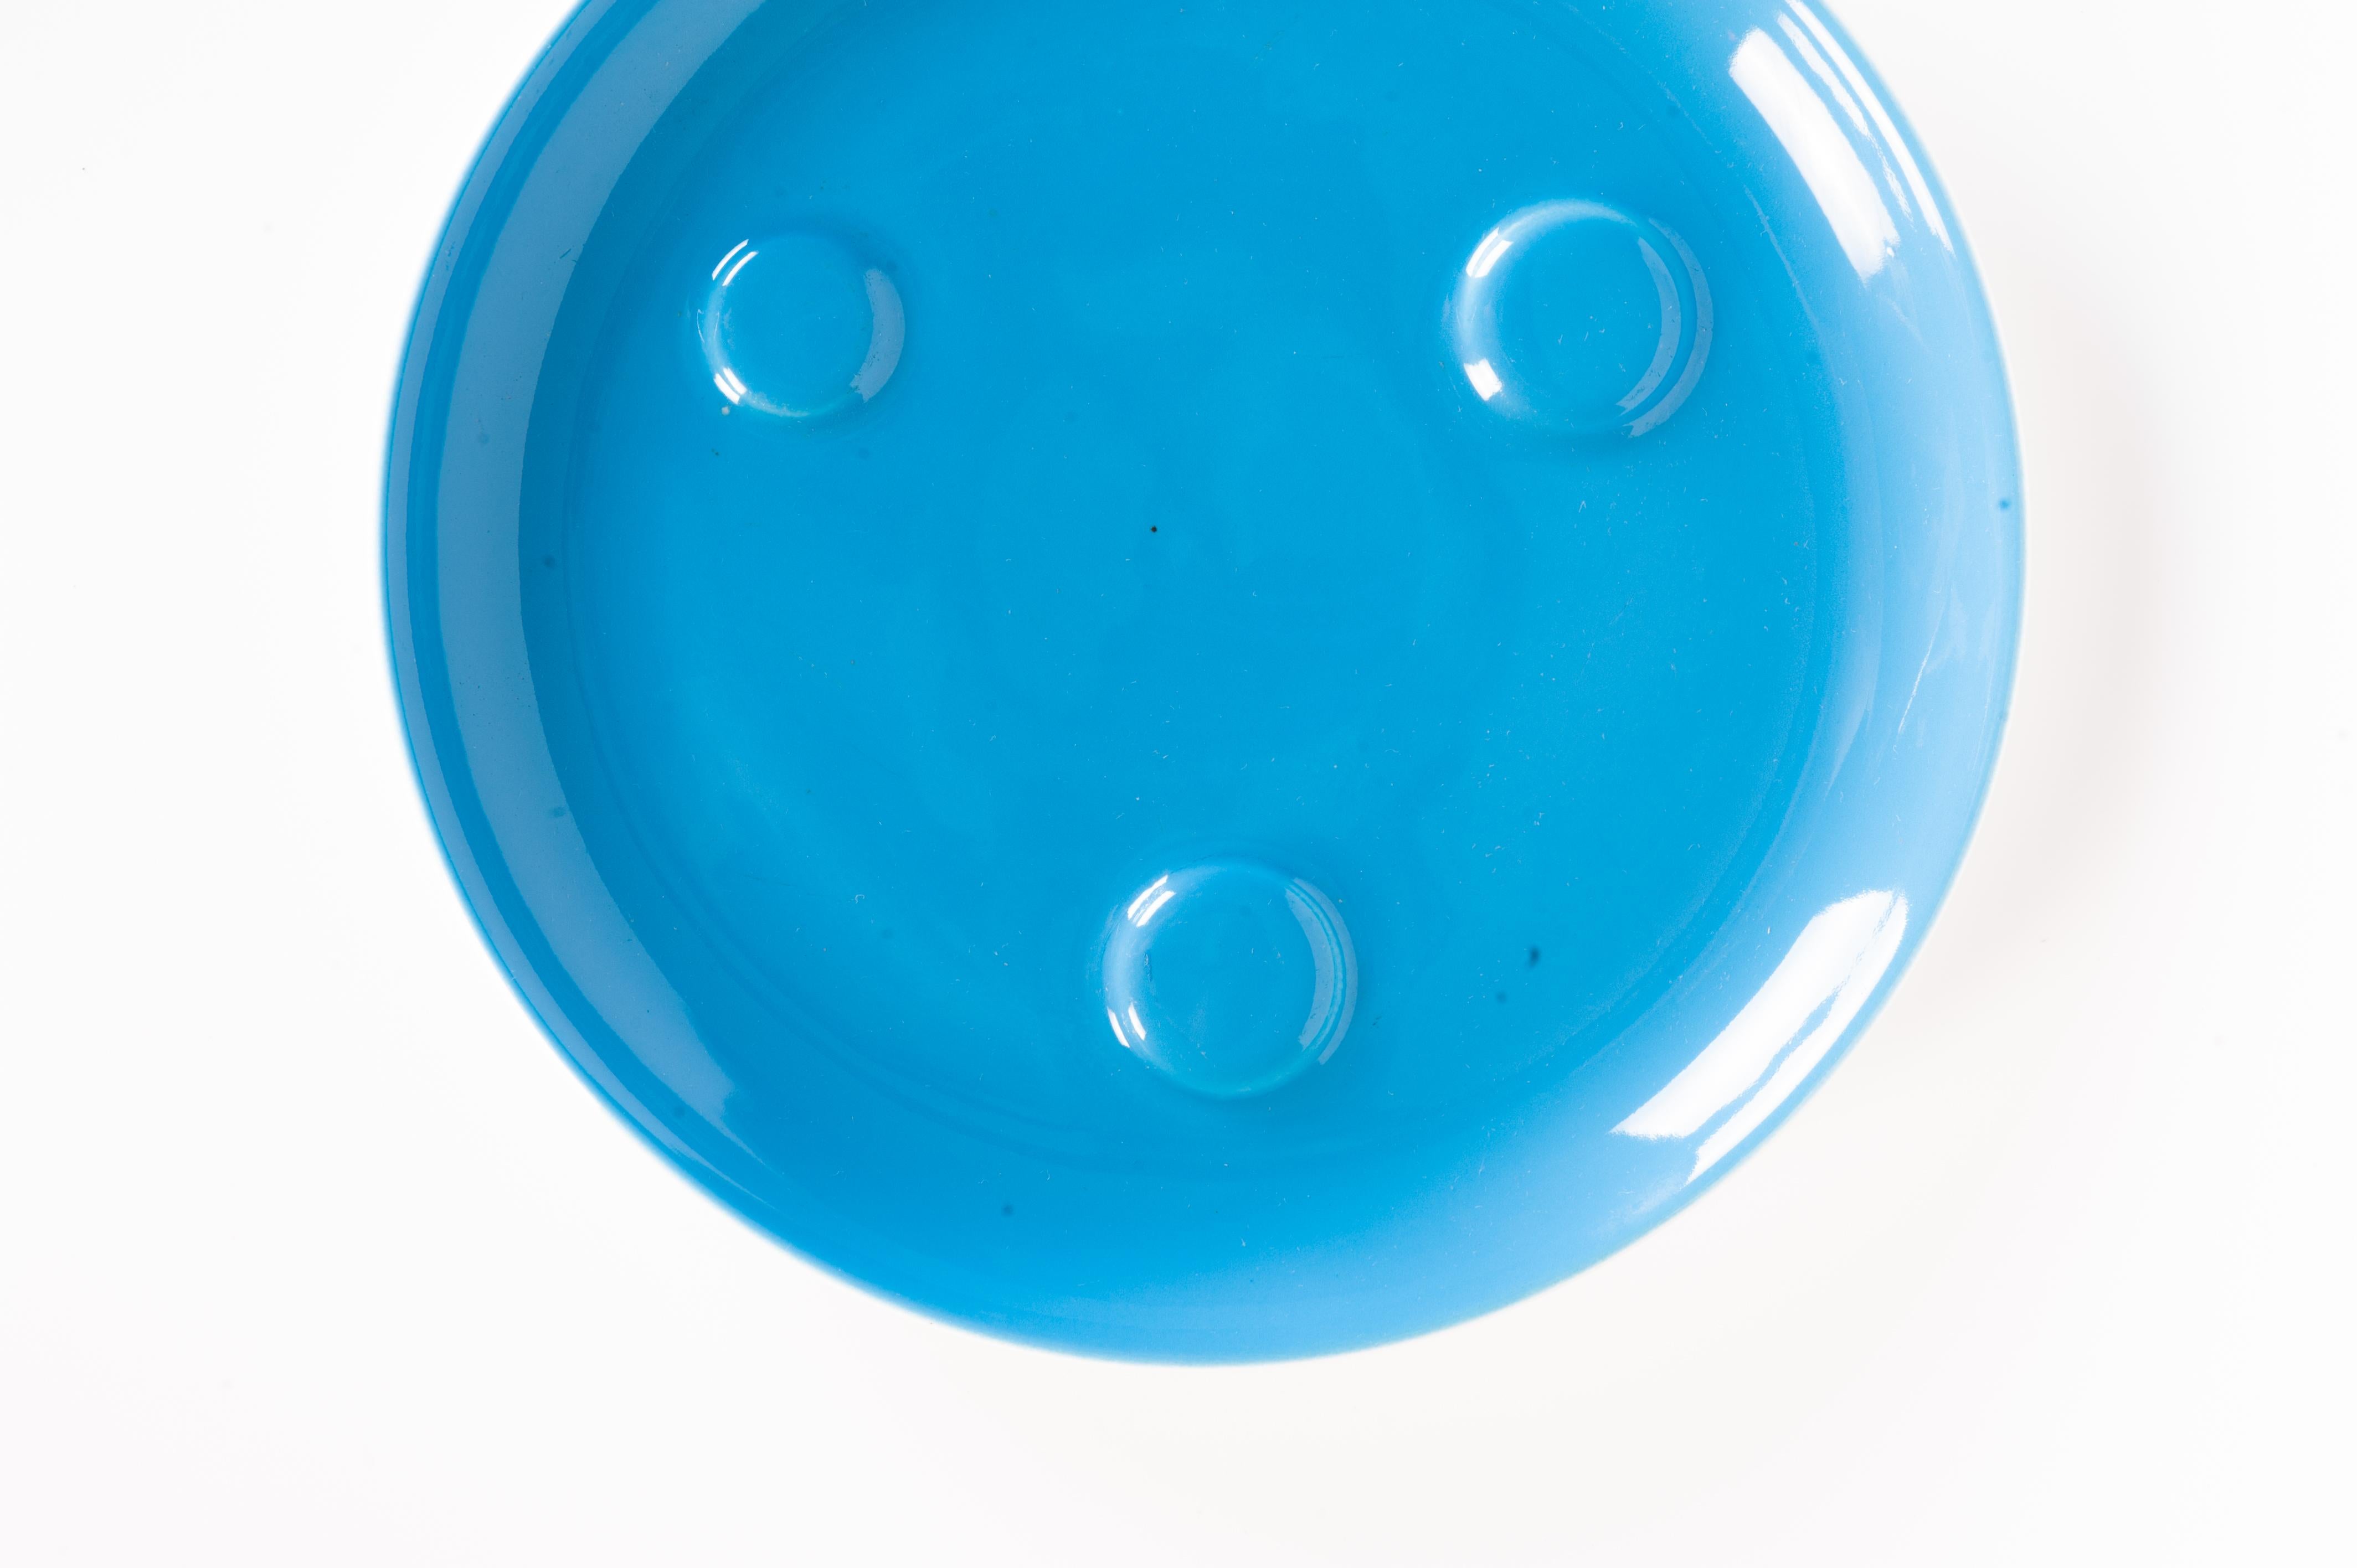 Pagnossin ceramic plate is an elegant ceramic decorative object, designed by Riccardo Schweizer and realized by Ceramiche Pagnossin in 1970s.

Ceramic light blue plate with circular relief decorations.

Marked under the base Pagnossin Linea